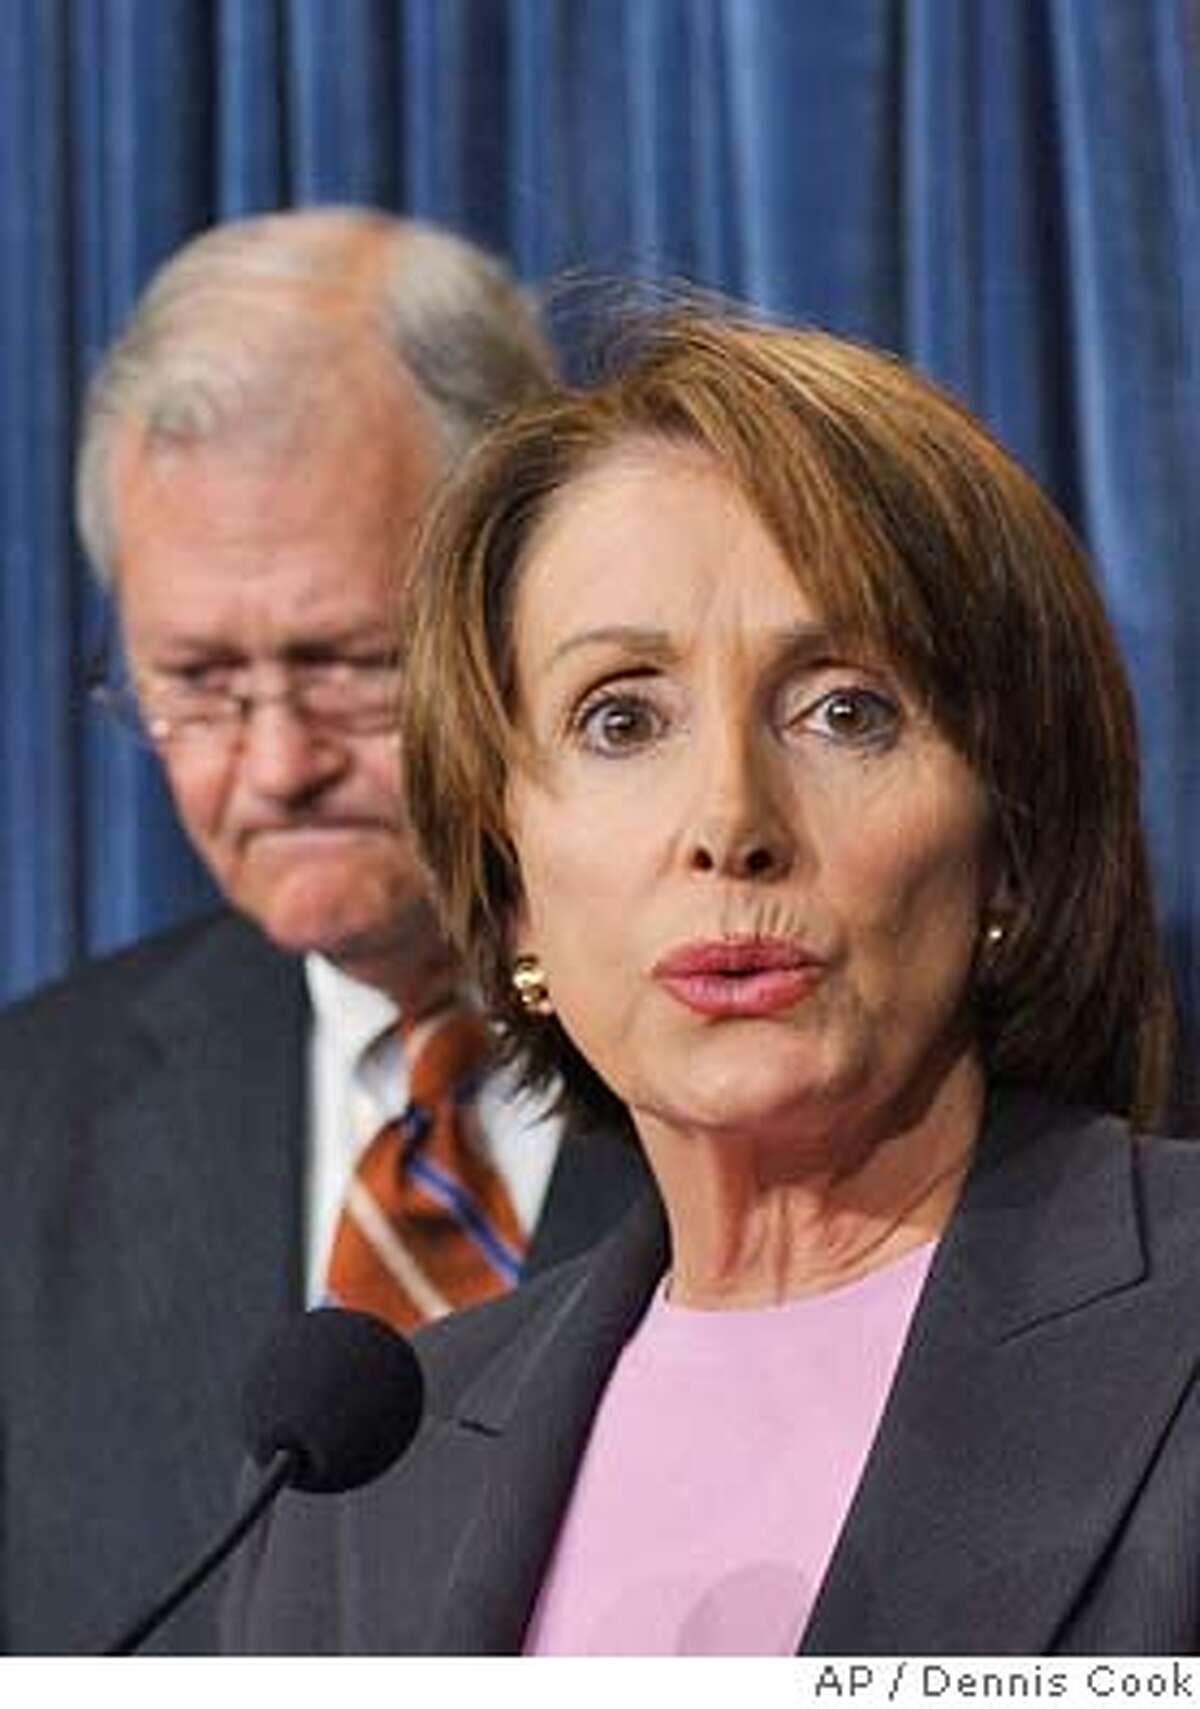 House Minority Leader Nancy Pelosi, D-Calif., calls for Defense Secretary Donald Rumsfeld's resignation on Capitol Hill Thursday, May 6, 2004, following revelations related to the treatment of of Way. At left is Rep. Ike Skelton, D-Mo. (AP Photo/Dennis Cook)